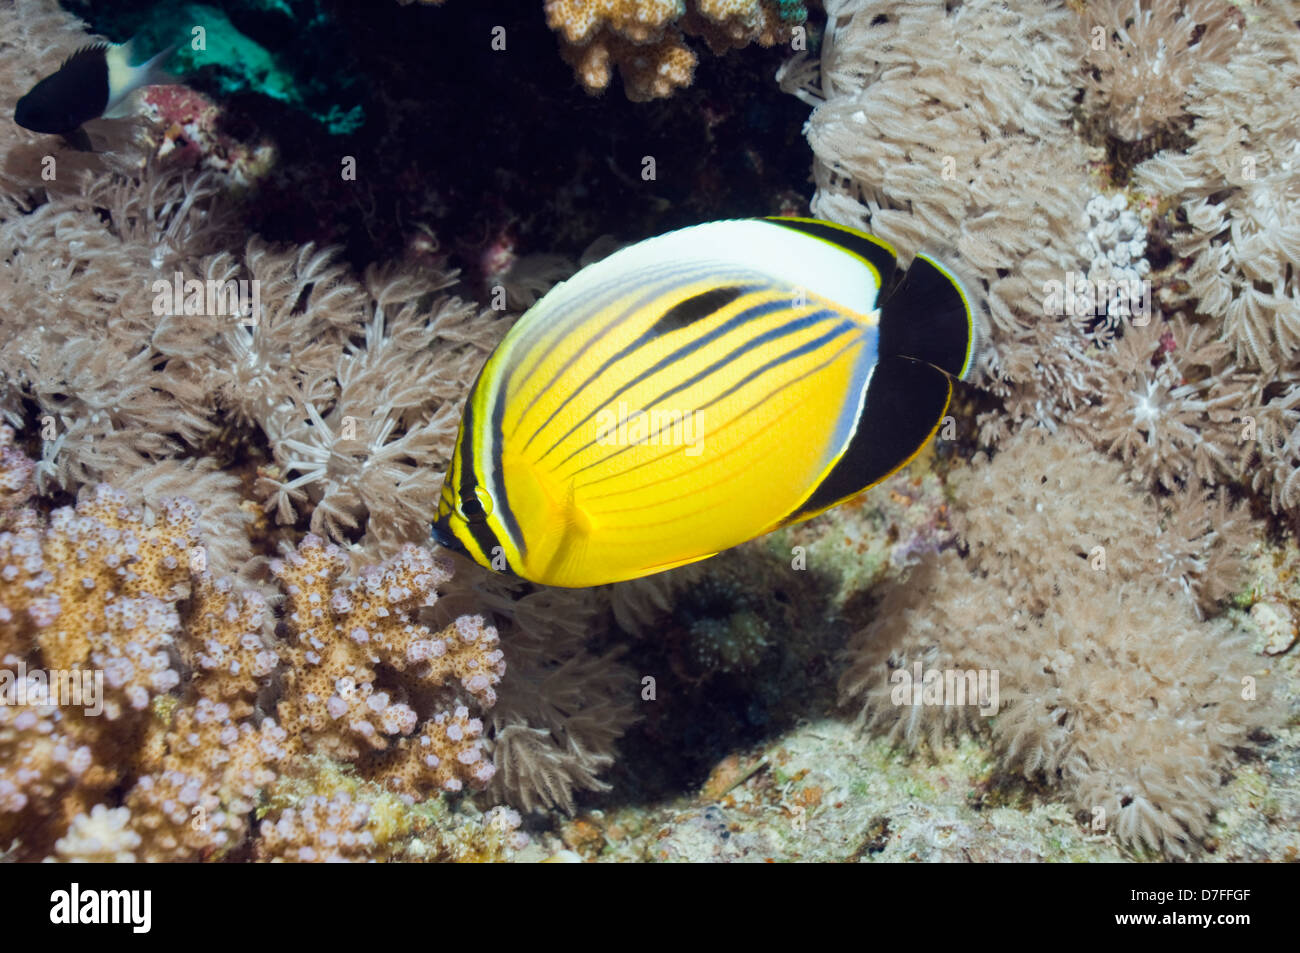 Exquisite or Blacktail butterflyfish (Chaetodon austriacus). Egypt, Red Sea. Stock Photo